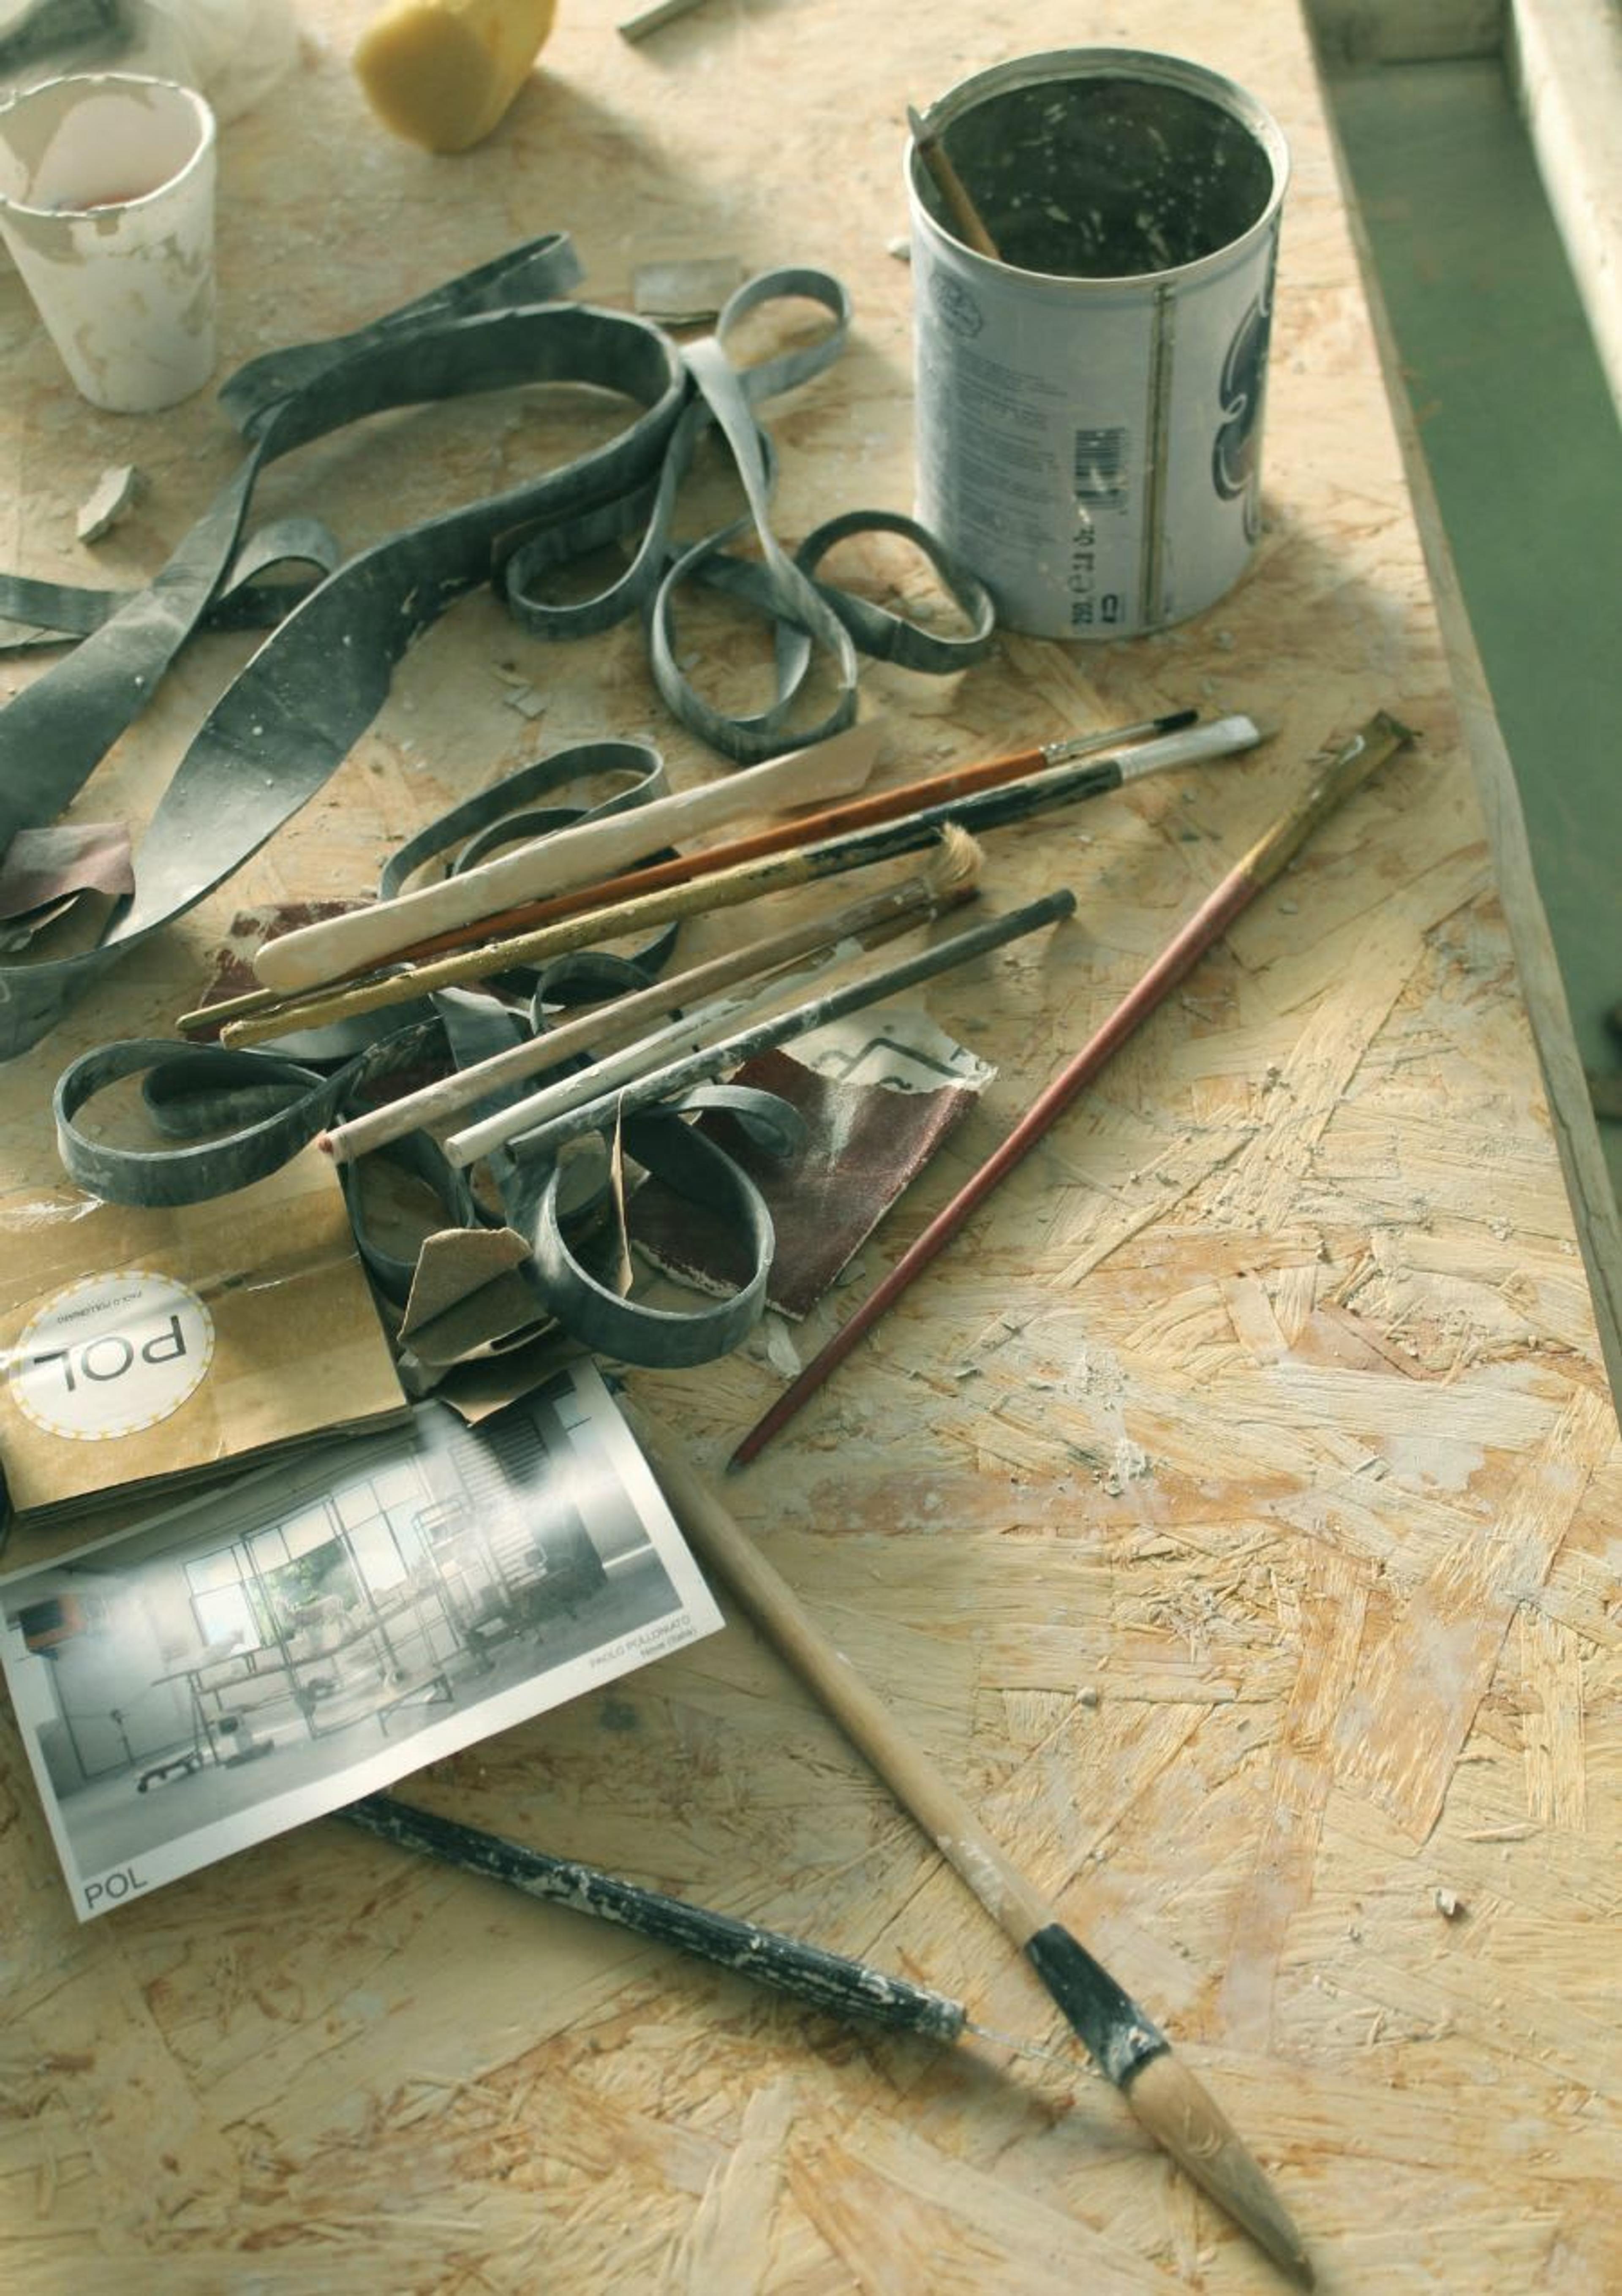 Paolo Polloniato working tools.